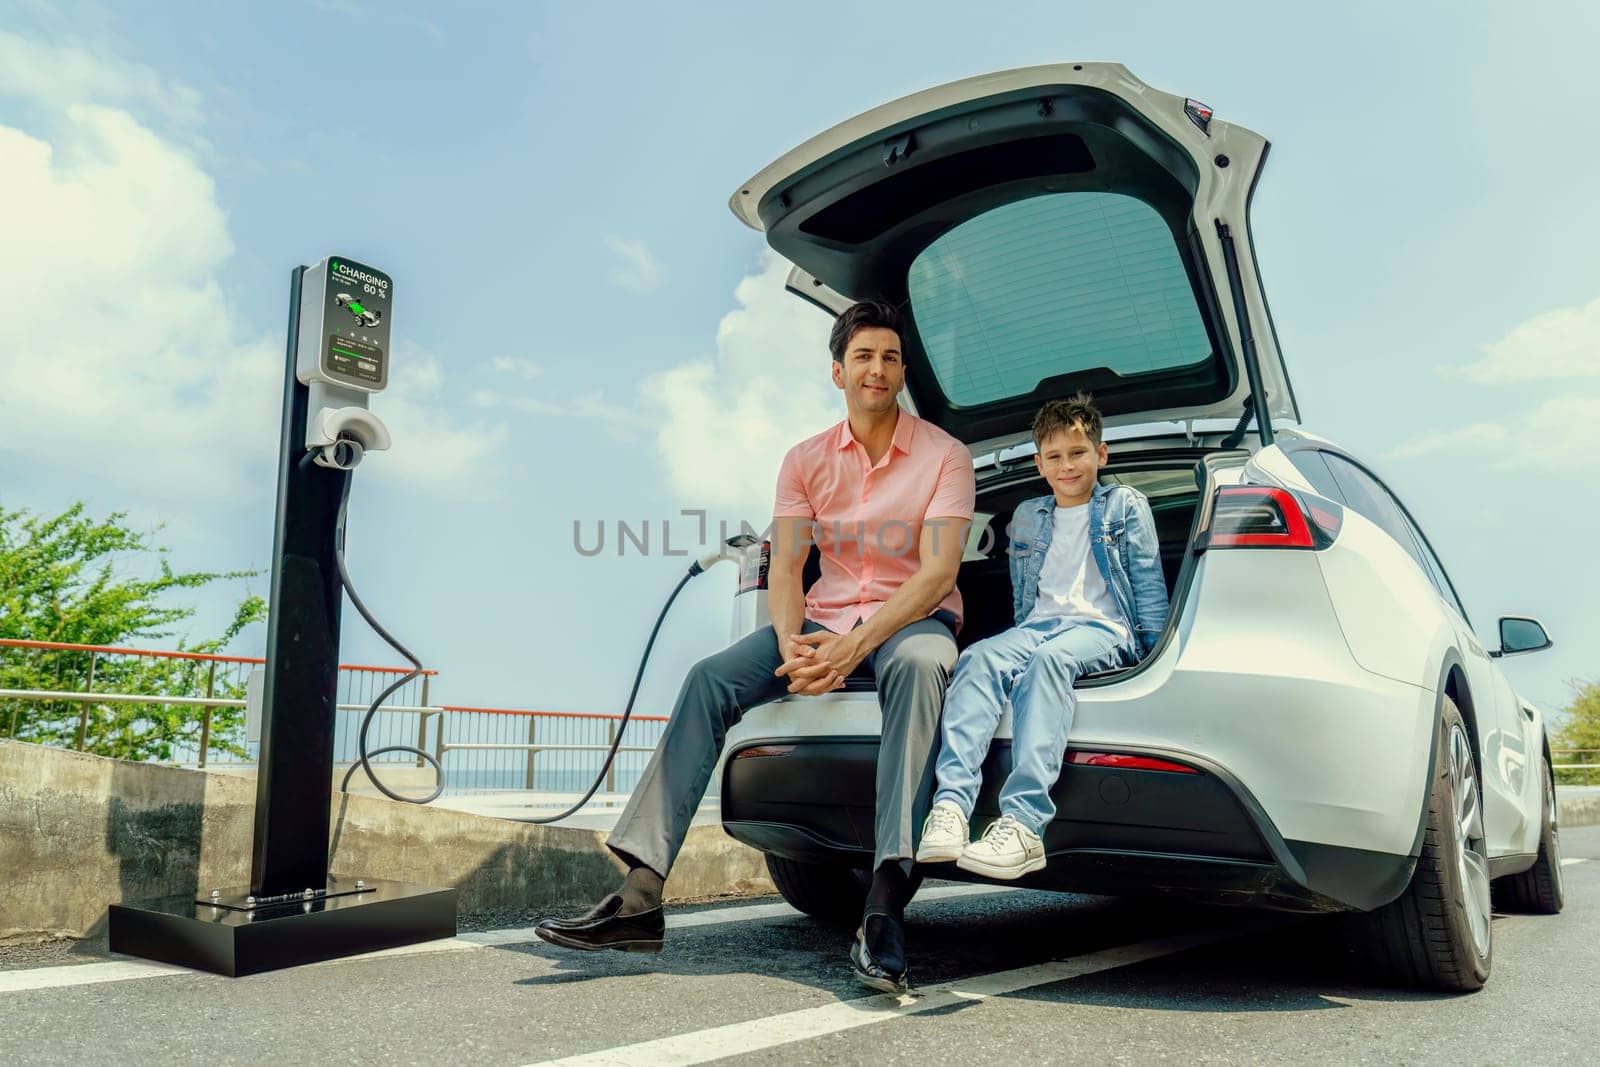 Family road trip vacation traveling by the sea with electric car, father and son recharge EV car with green and clean energy. Natural travel and eco-friendly car for sustainable environment. Perpetual